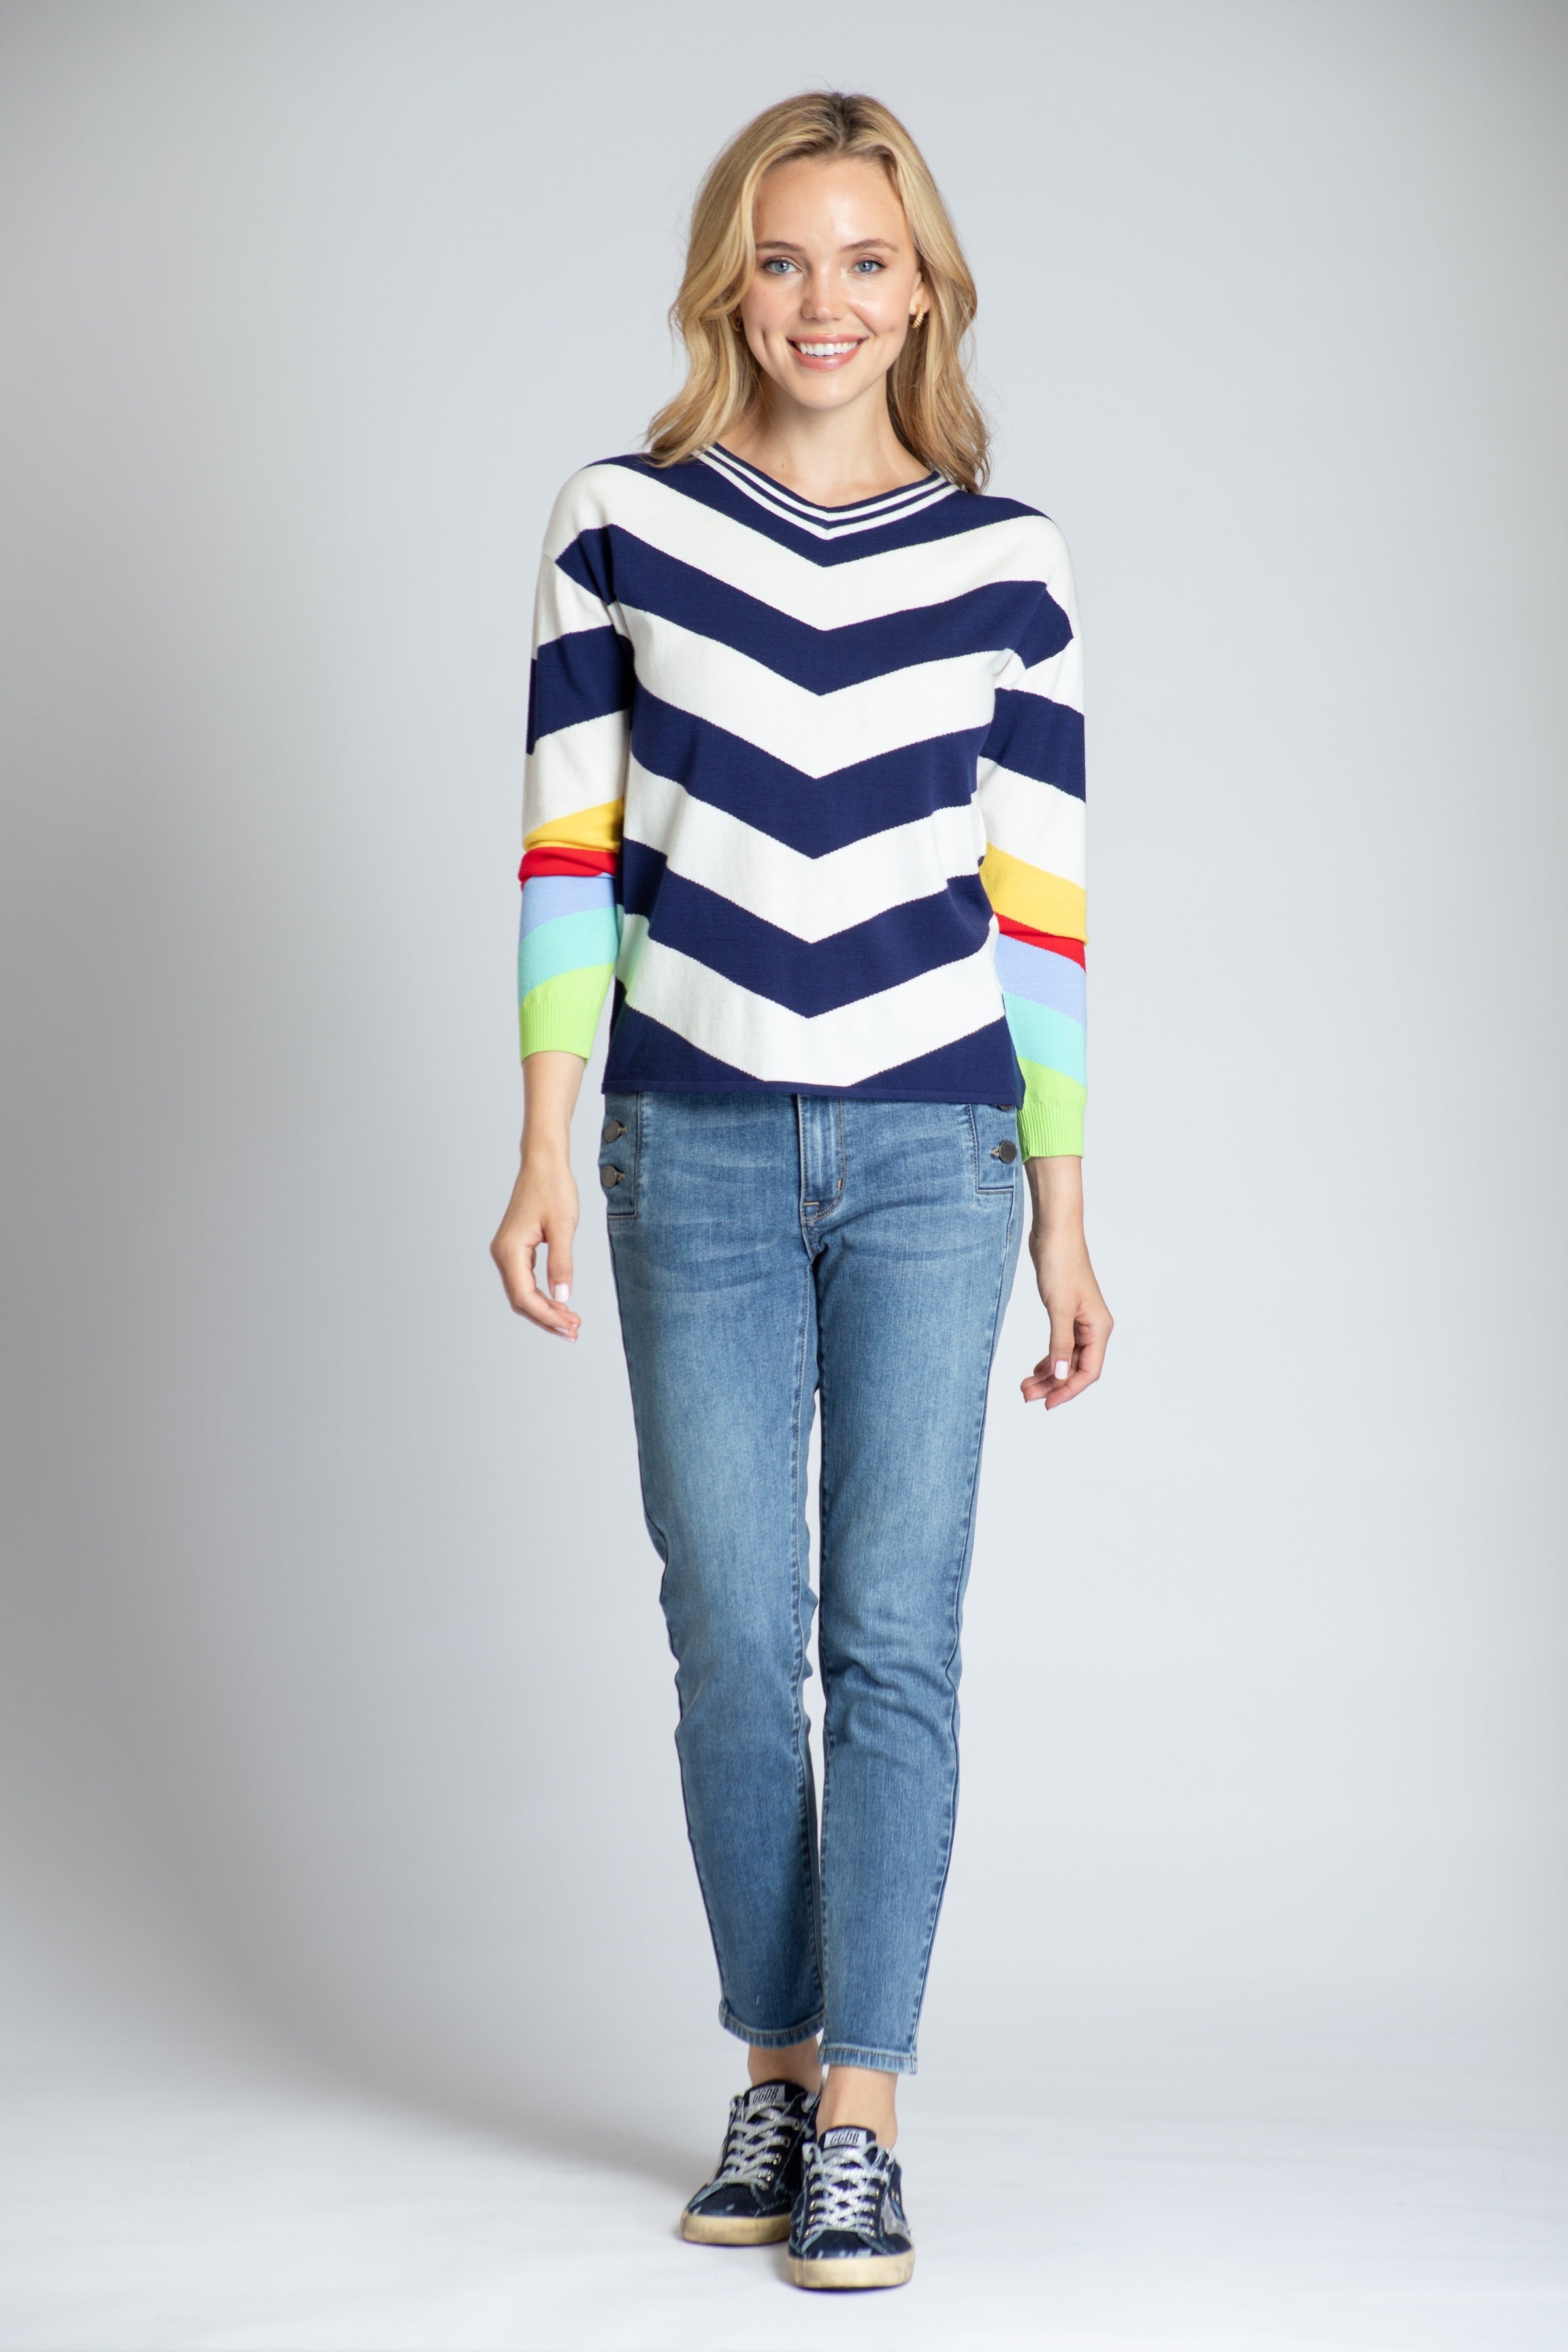 Chevron Pull Over With Rainbow Cuffs